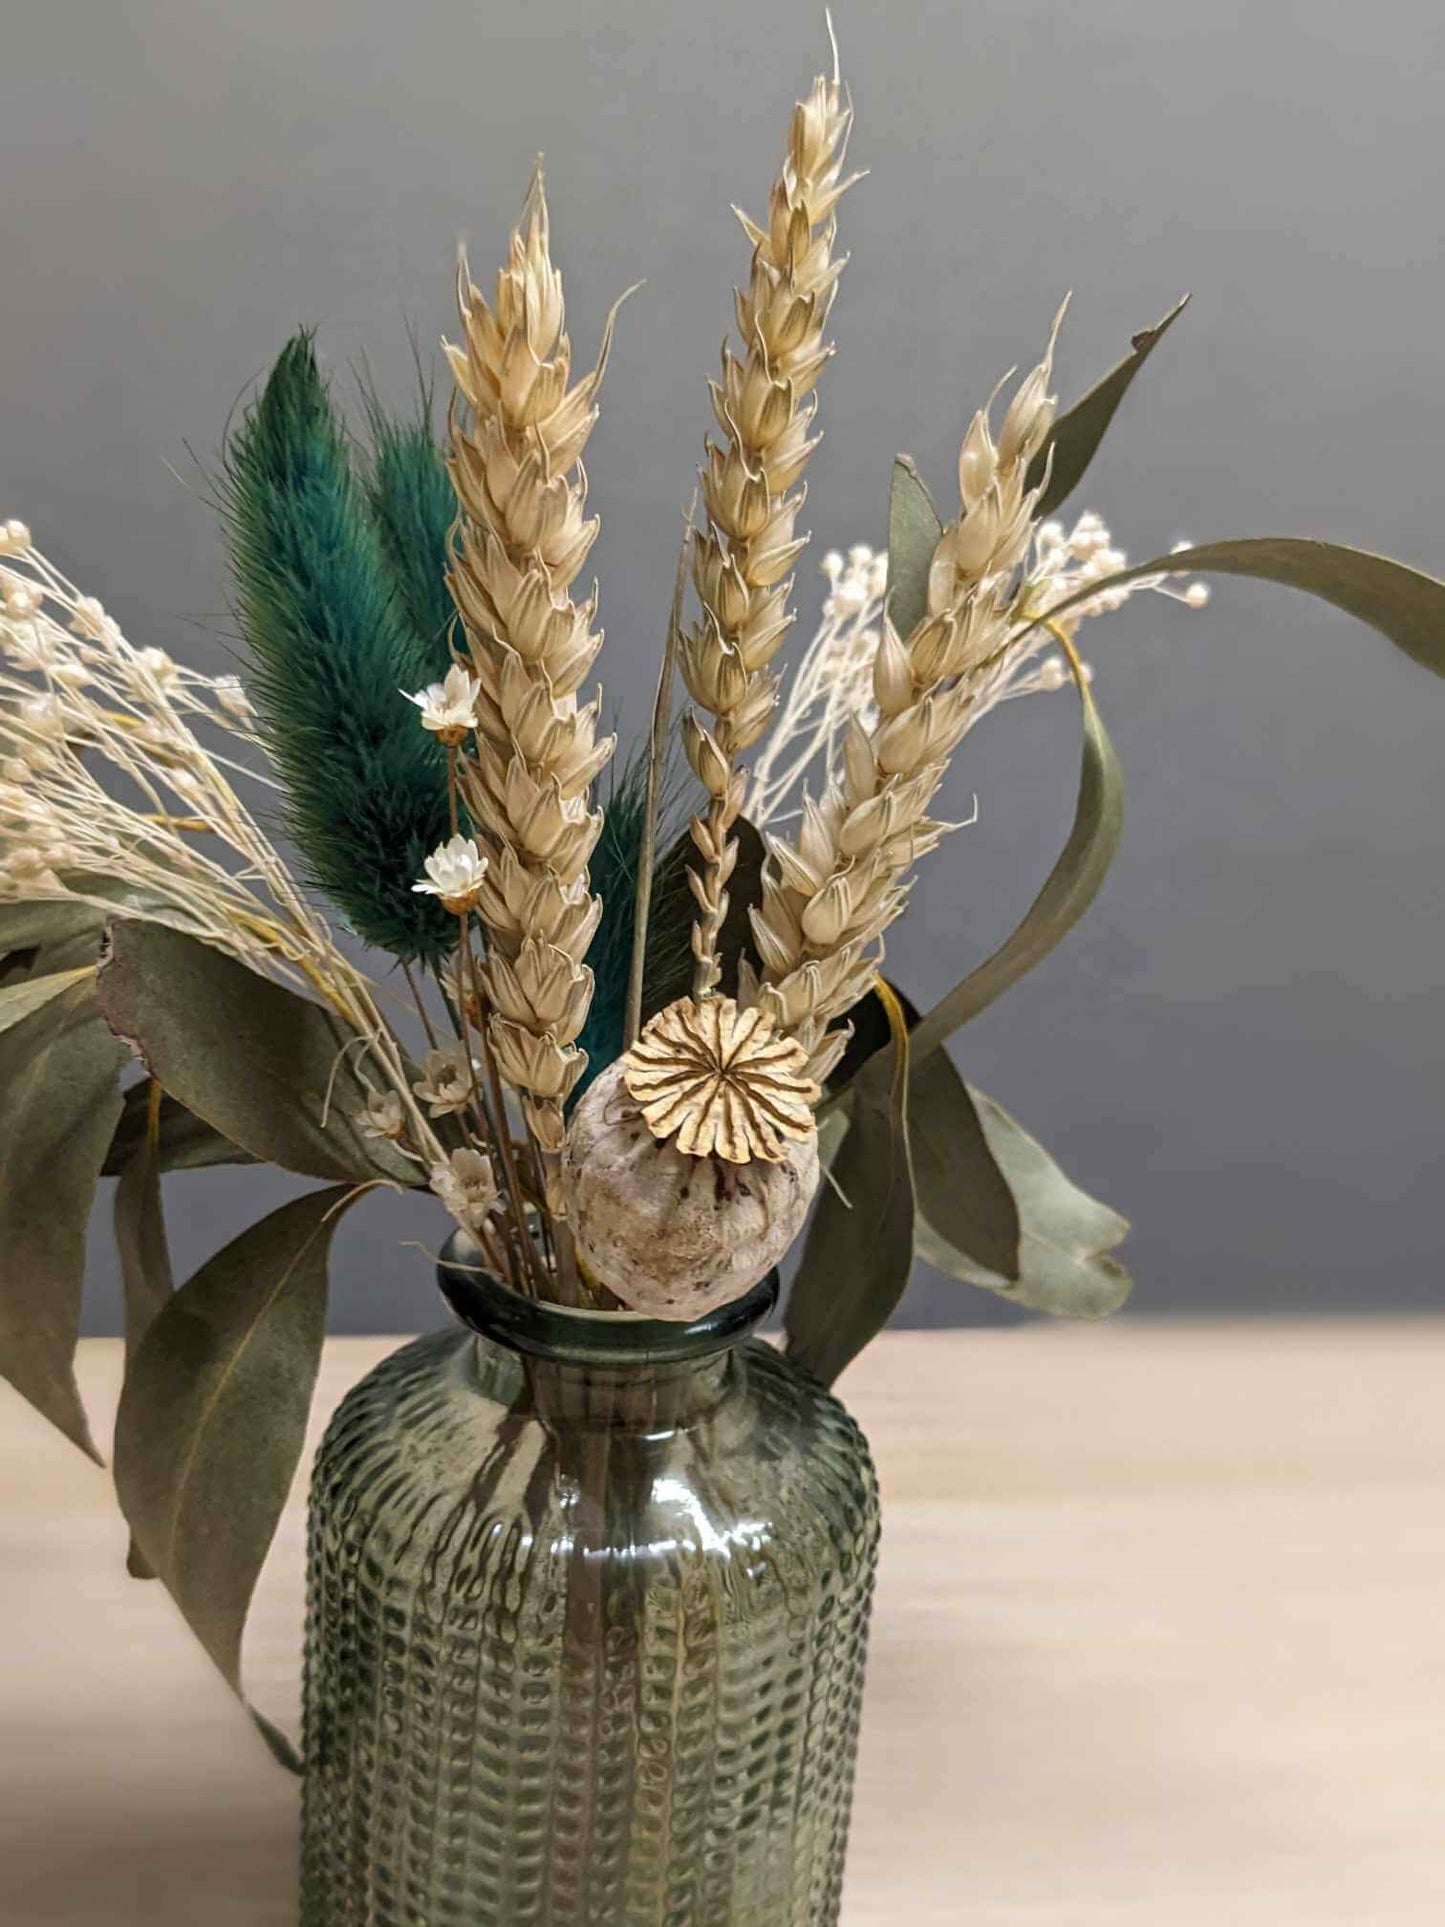 Nature-inspired Bottle Green Vase with Dried Wheat, Bunny Tails and Eucalyptus